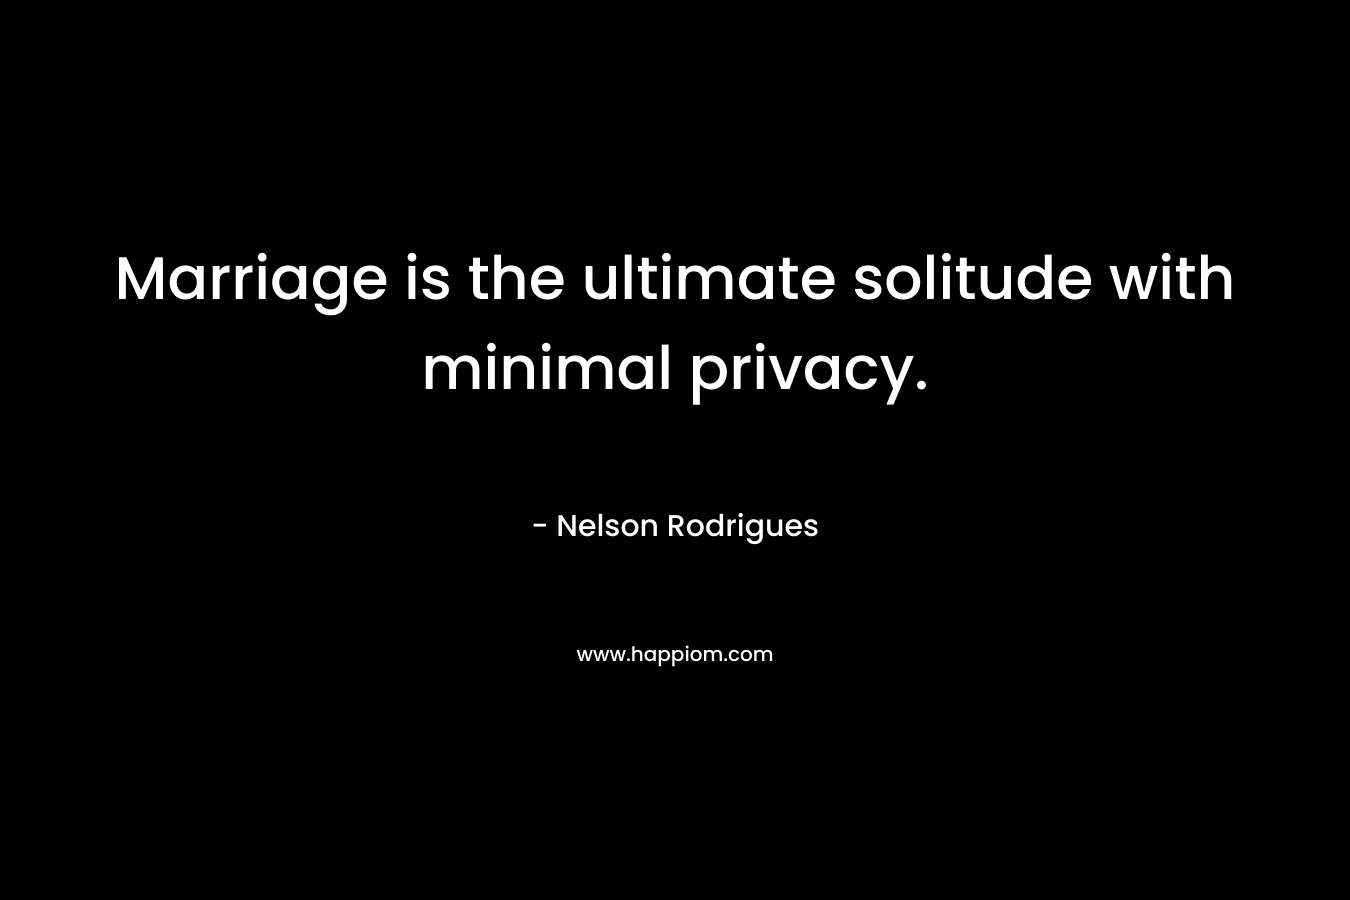 Marriage is the ultimate solitude with minimal privacy. – Nelson Rodrigues